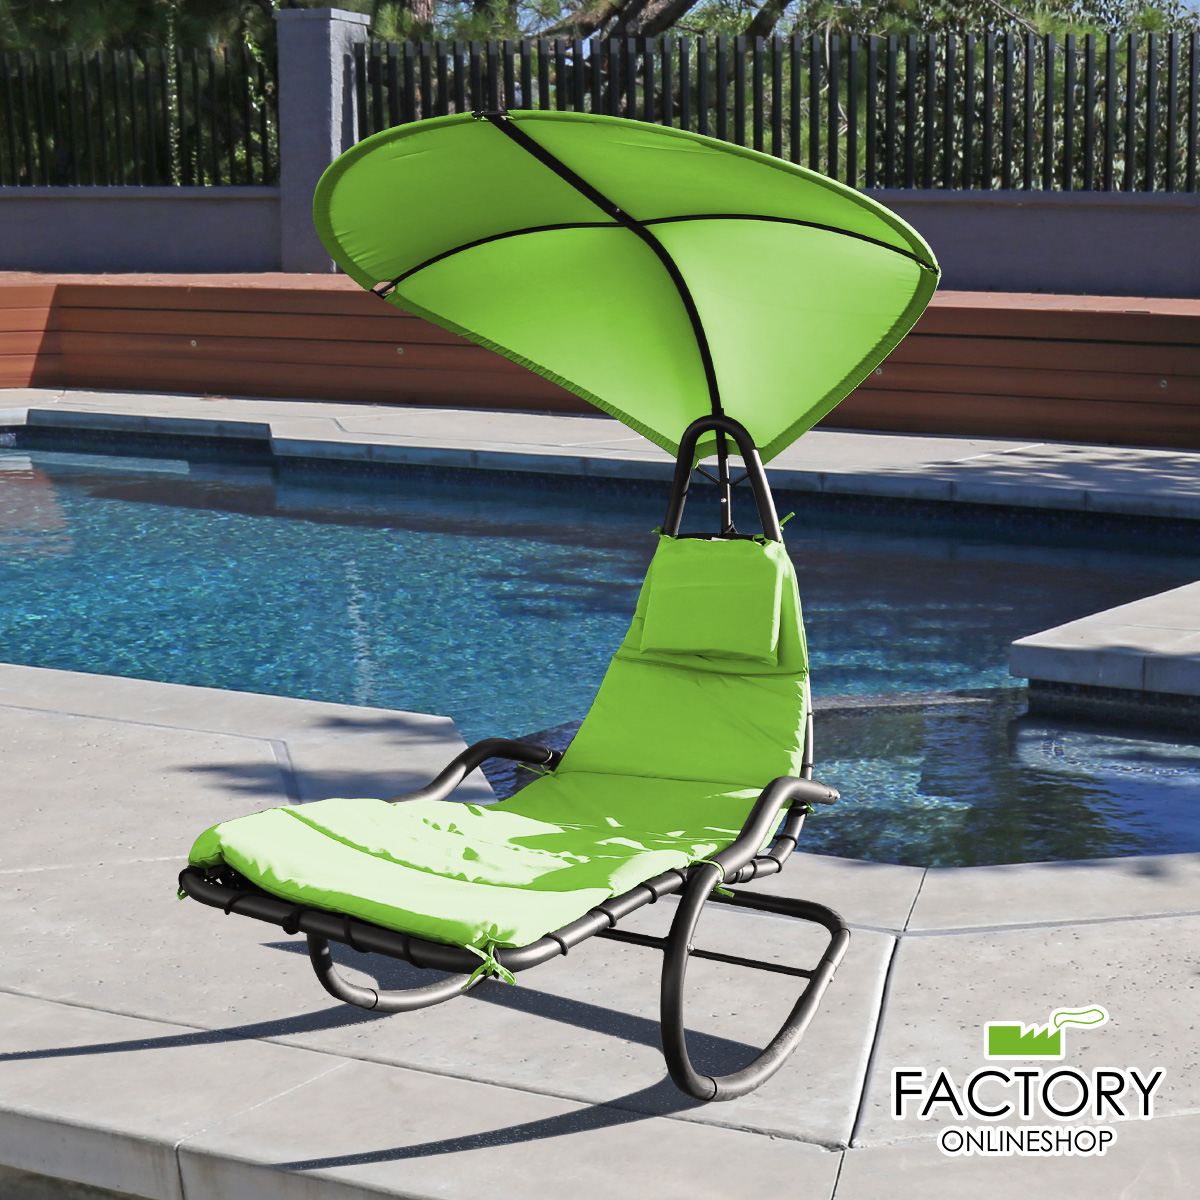 Rocking Hanging Lounge Chair - Curved Chaise Rocking Lounge Chair Swing For Backyard Patio w/ Built-in Pillow Removable Canopy with stand {Green} - image 1 of 8